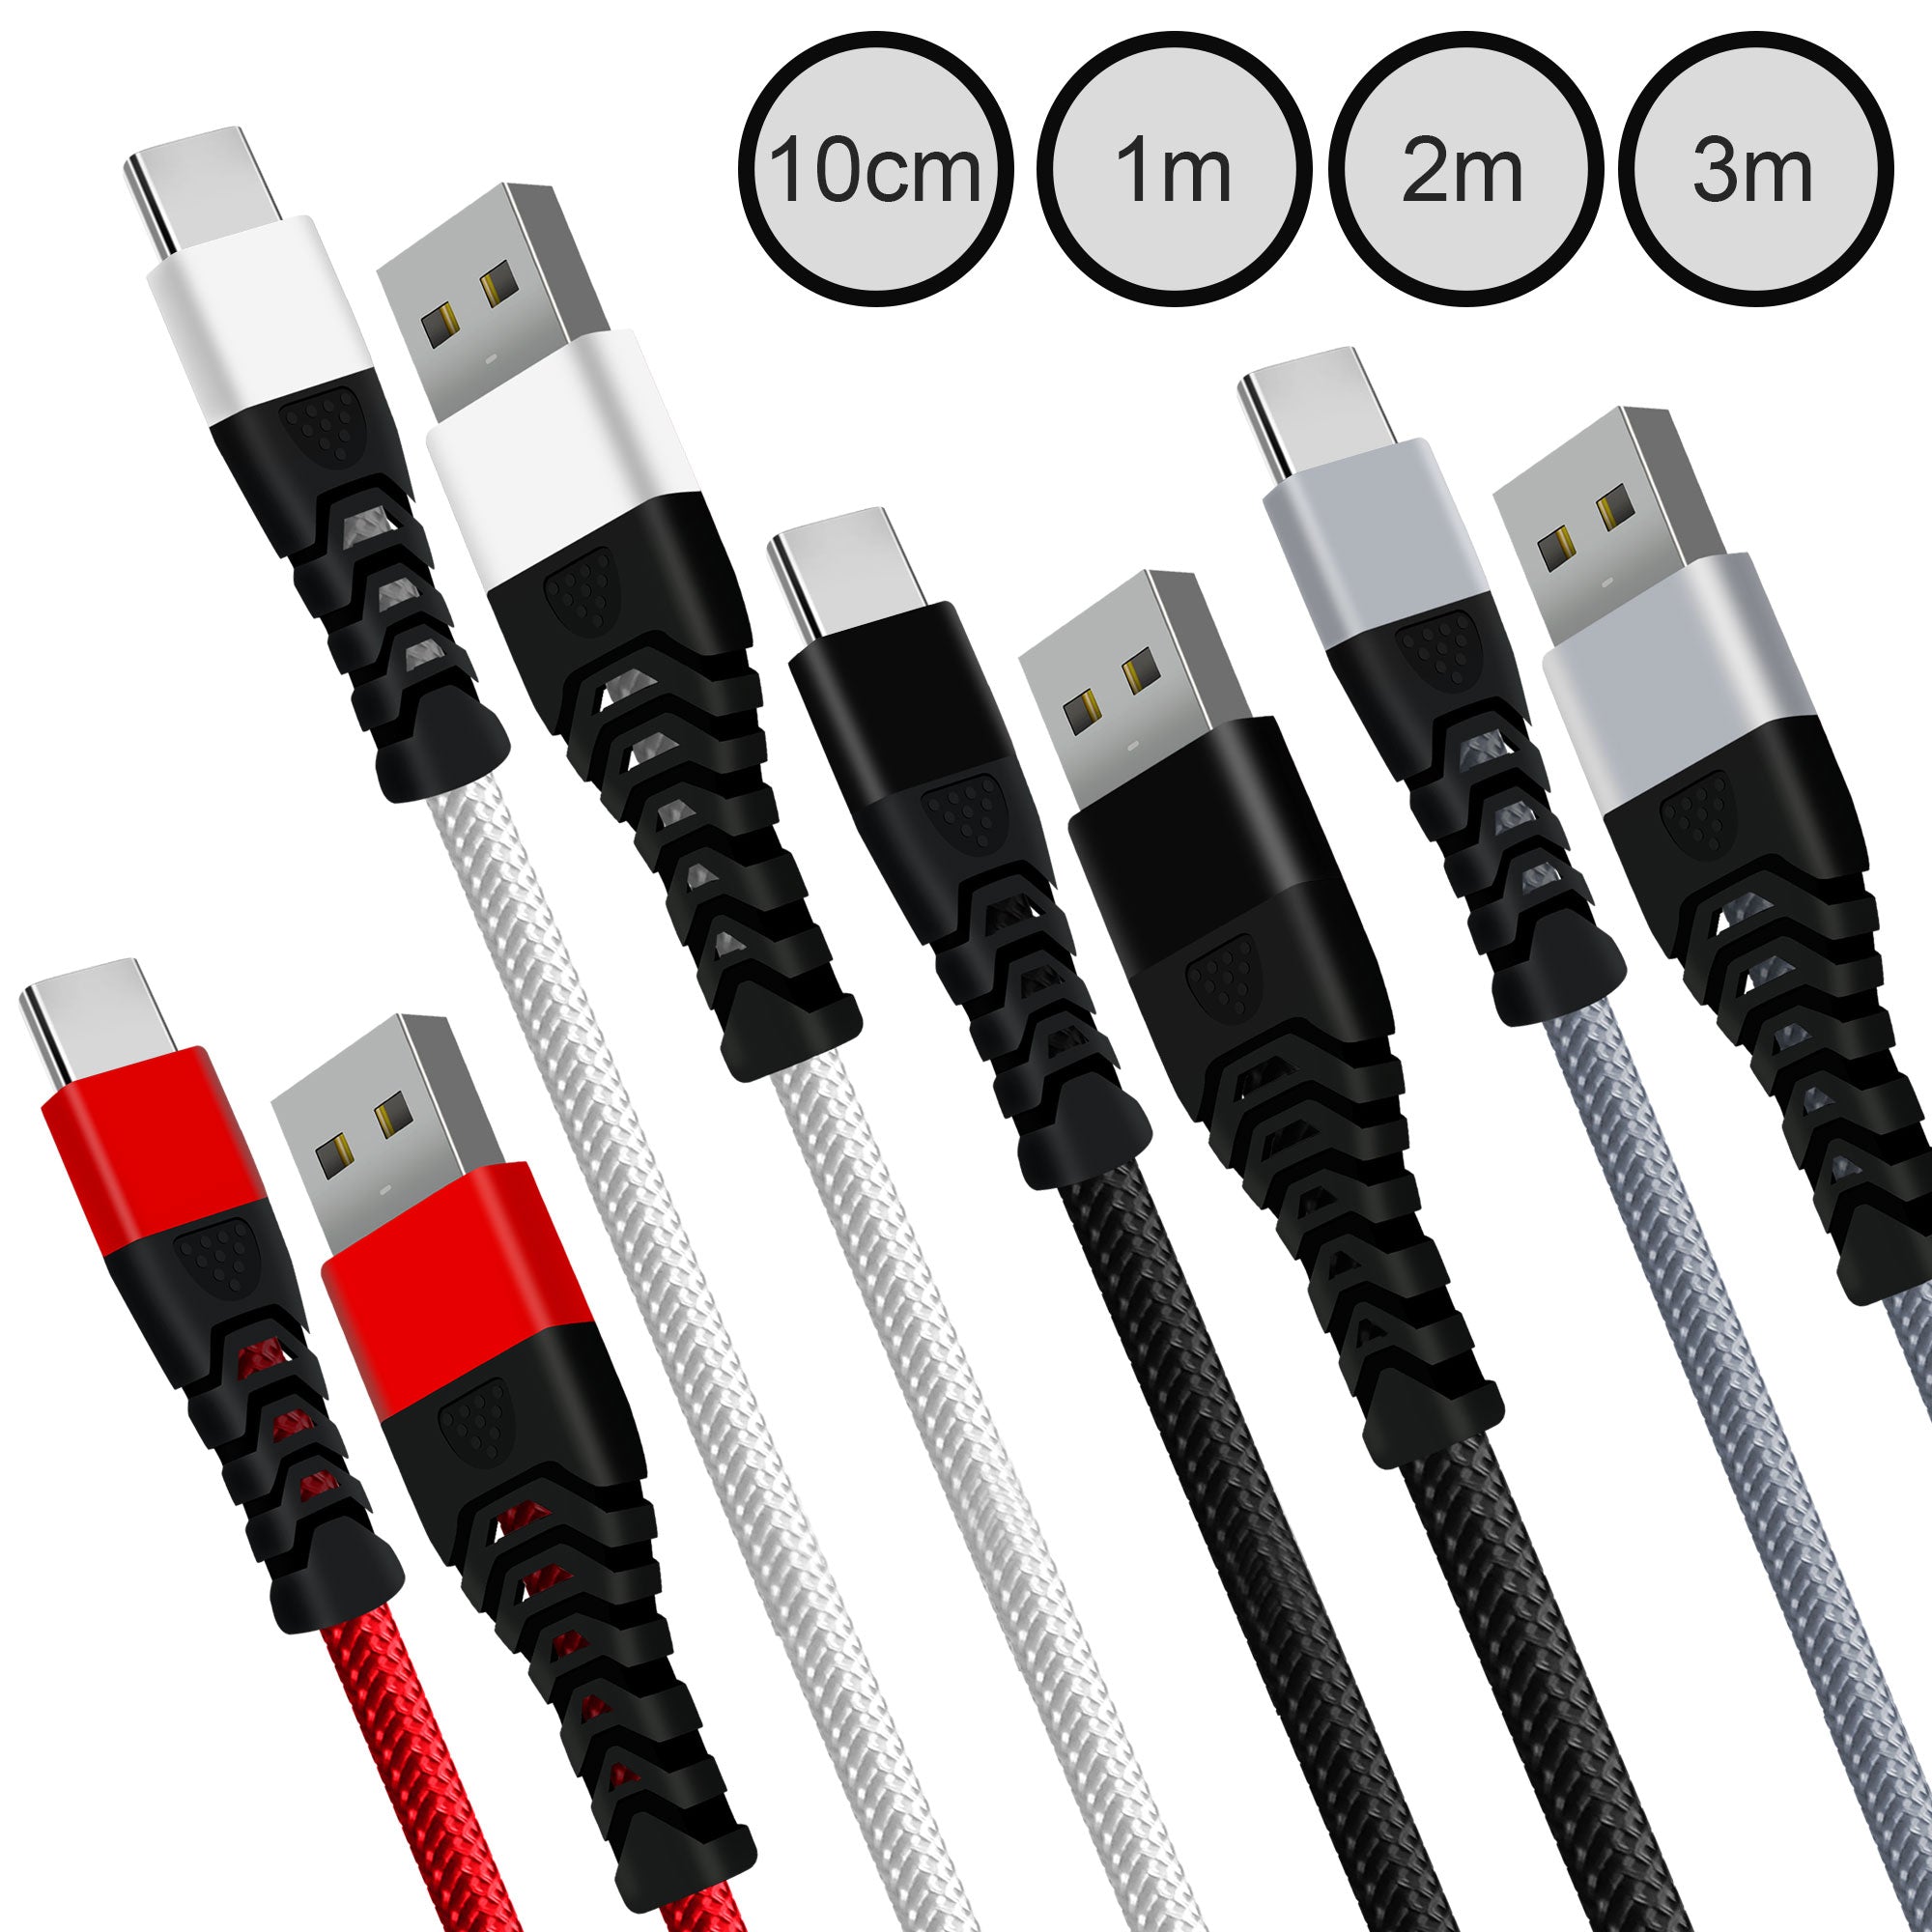 USB C Charger Cable 